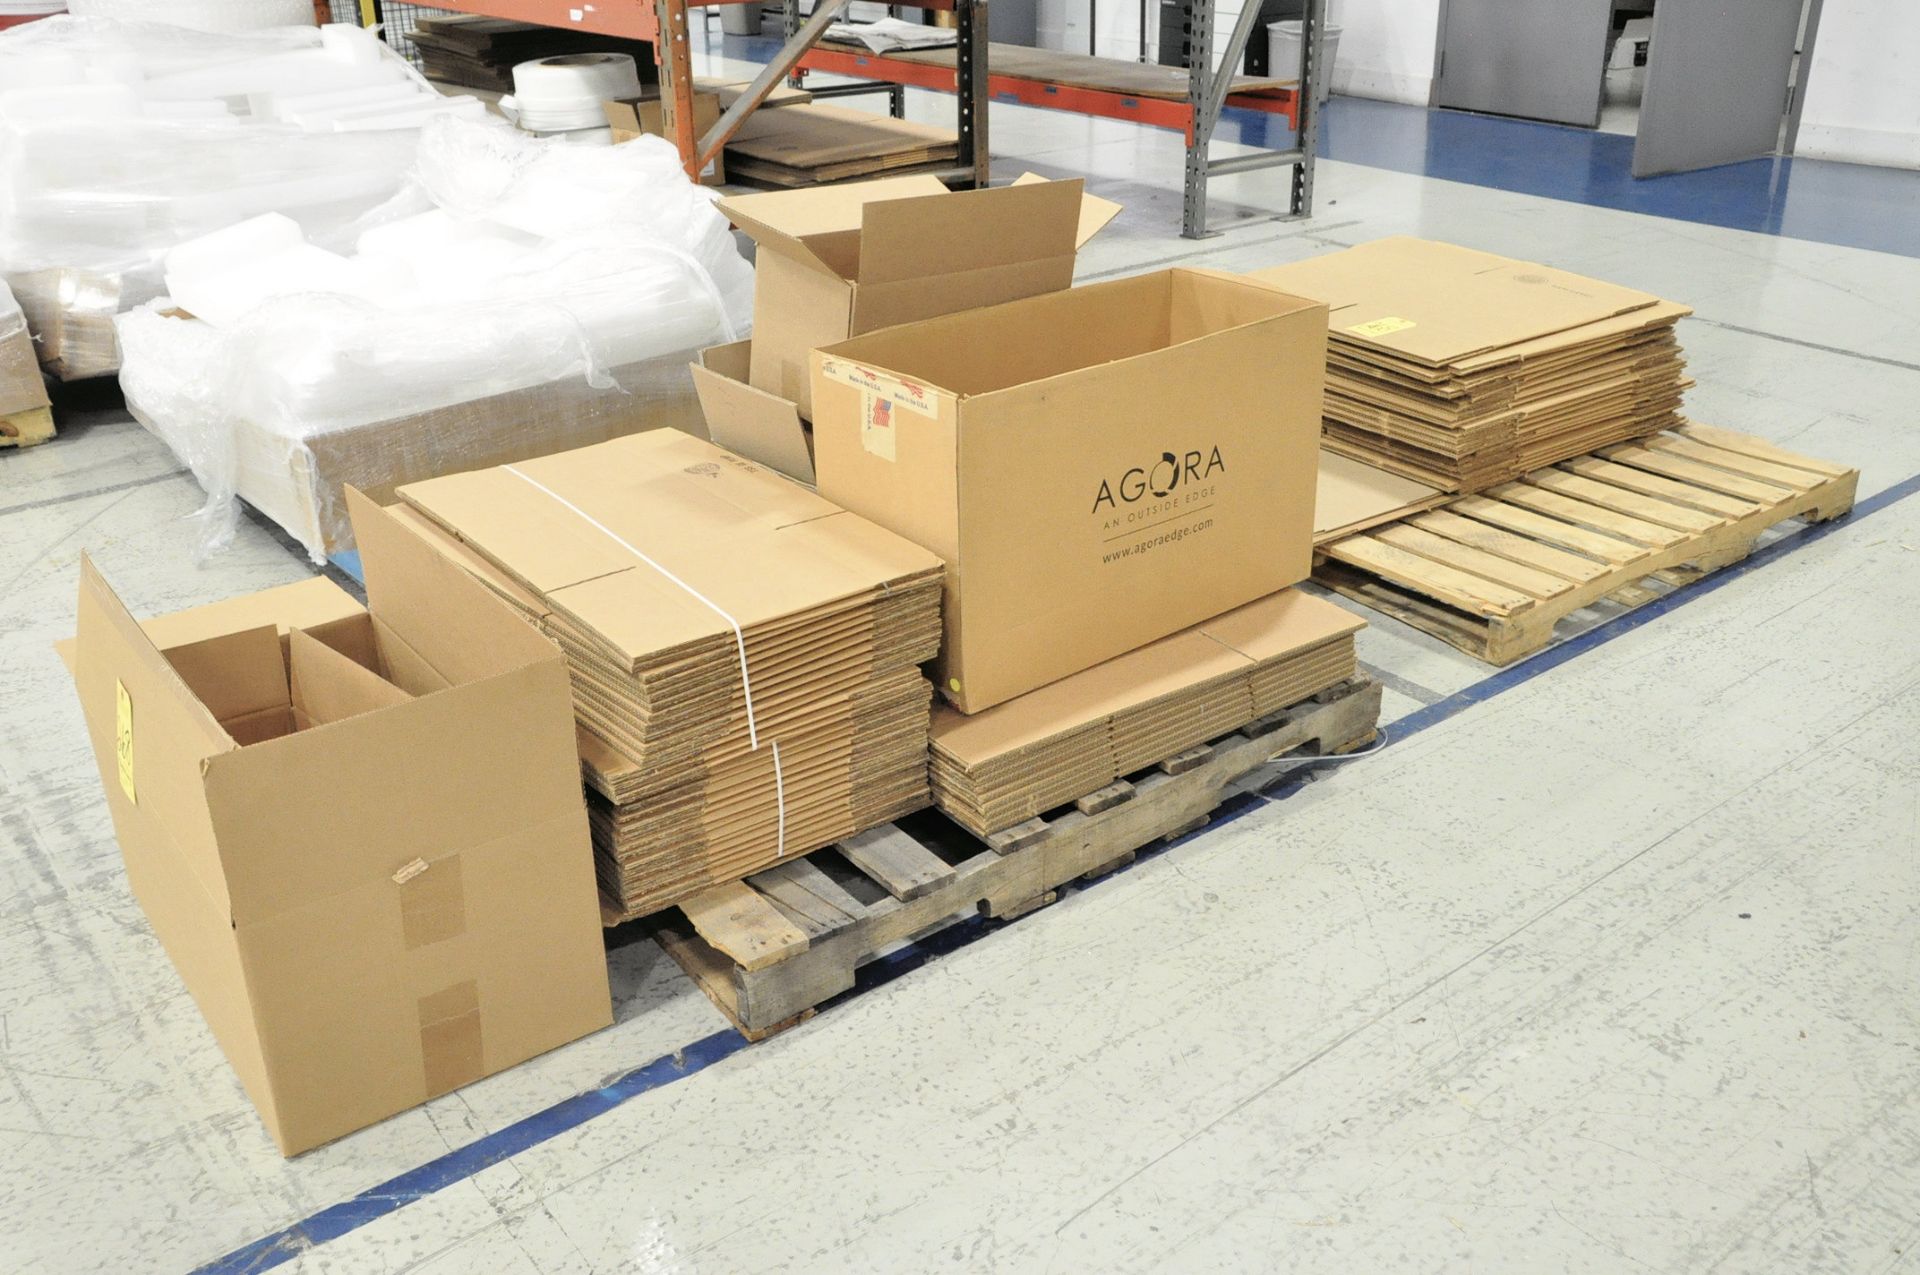 Lot-Various Shipping Boxes on (2) Pallets and (2) Shelves, Packing Materials on (1) Shelf and